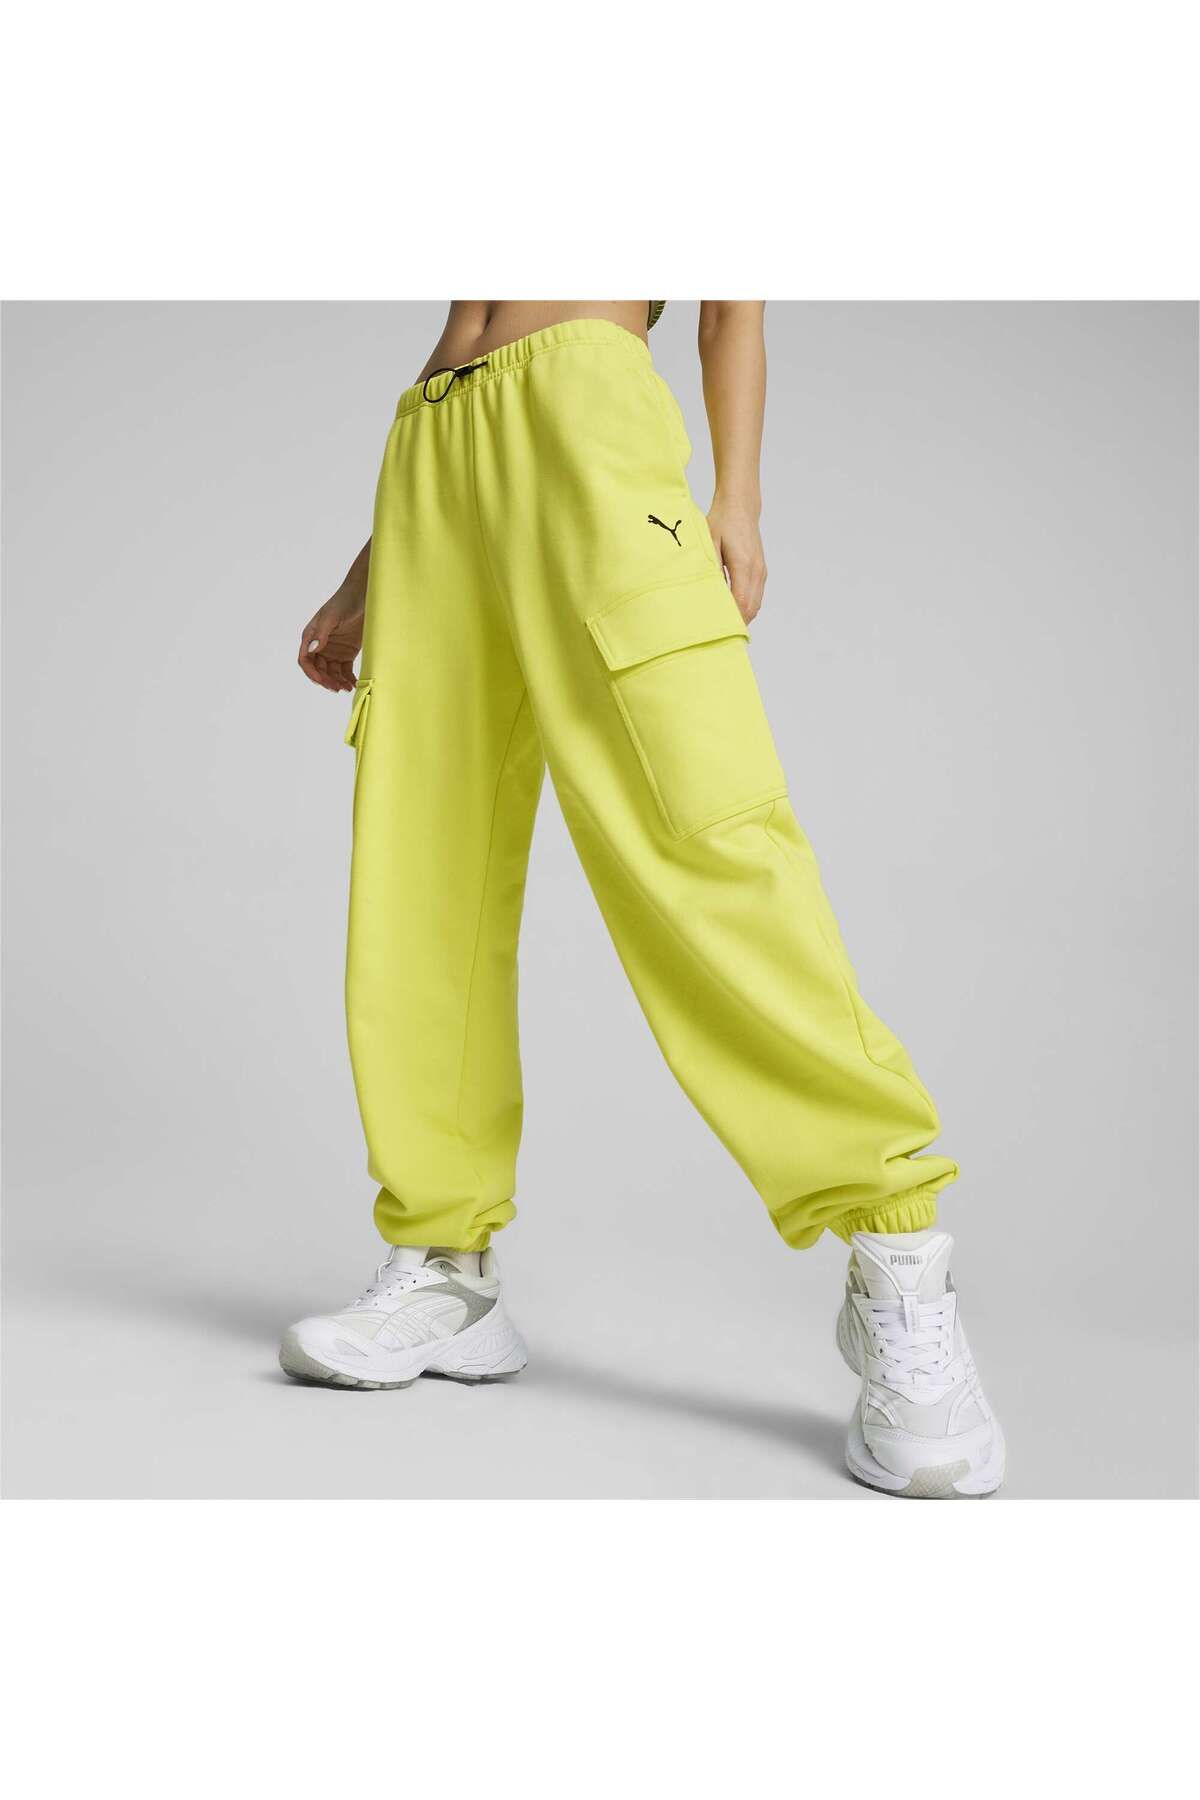 Puma DARE TO Relaxed Sweatpants